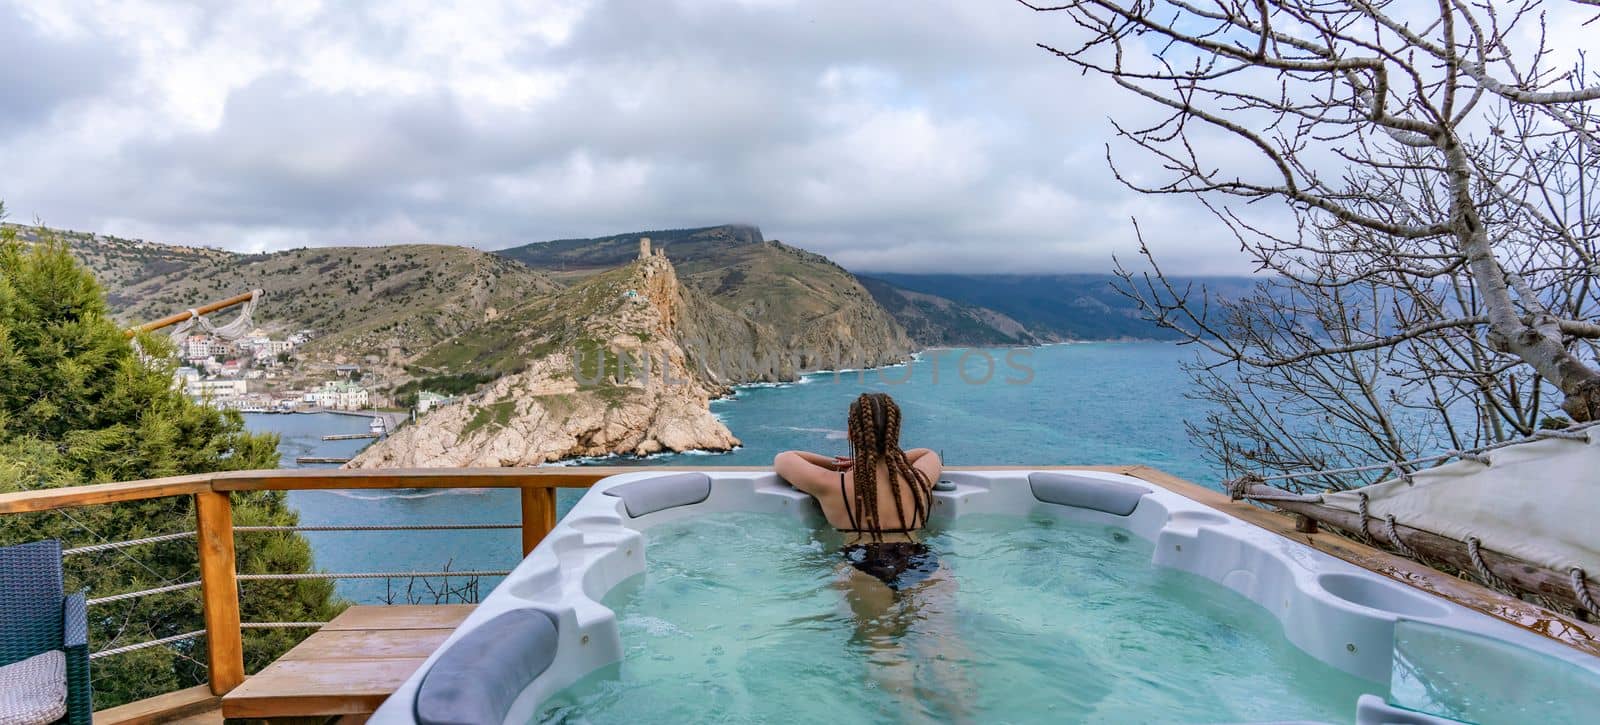 Outdoor jacuzzi with mountain and sea views. A woman in a black swimsuit is relaxing in the hotel pool, admiring the view by Matiunina